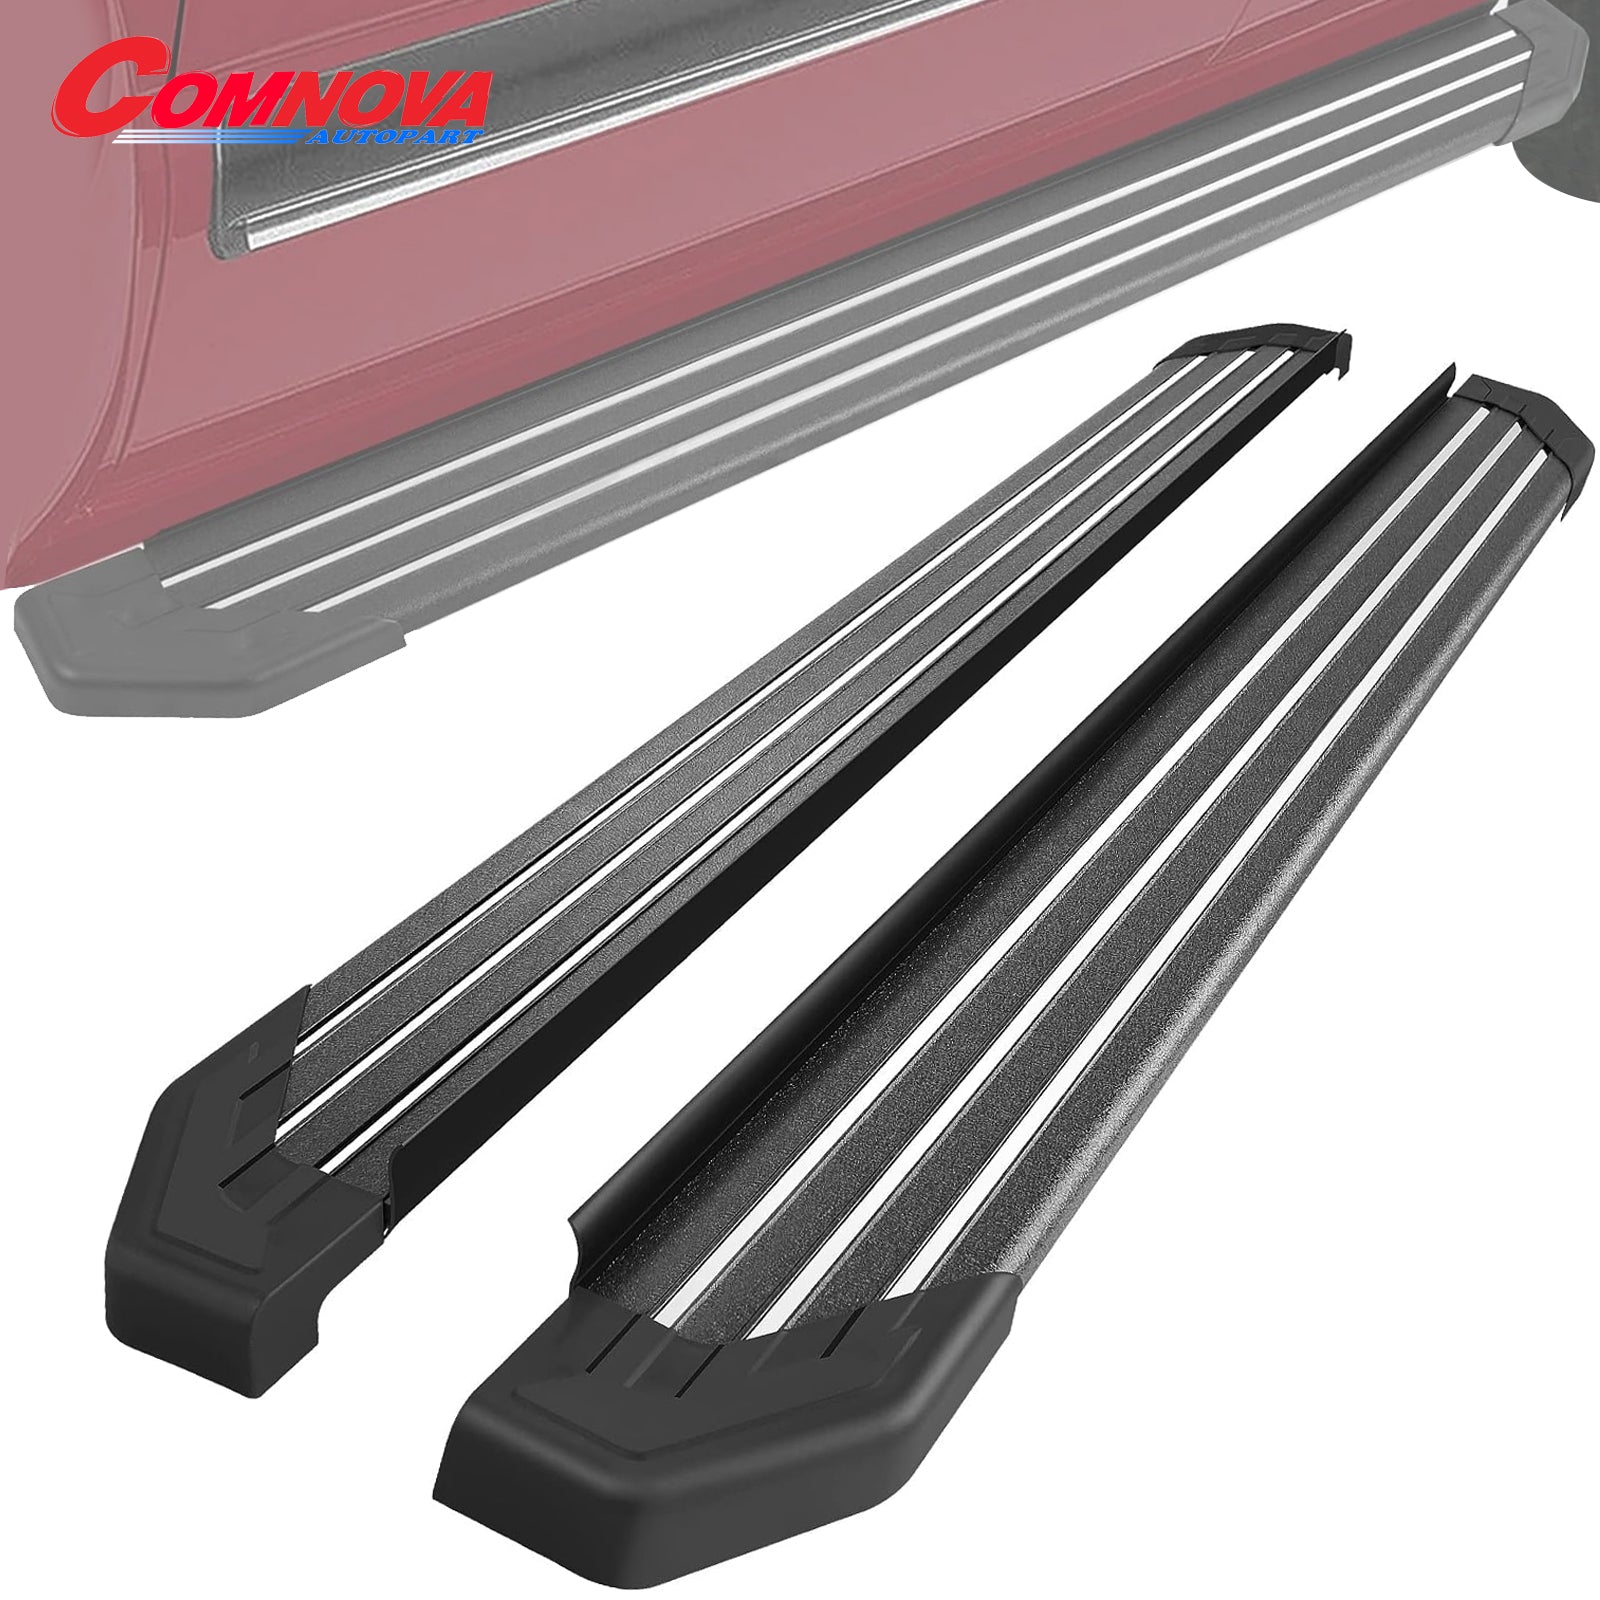 5.5Inch Aluminum Running Boards Compatible with 2010-2023 Toyota 4Runner (Incl. 2014-2023 Sr5 & 2015-2023 TRD Pro & 2017-2023 TRD Off-Road). C73 Style. - COMNOVA AUTOPART